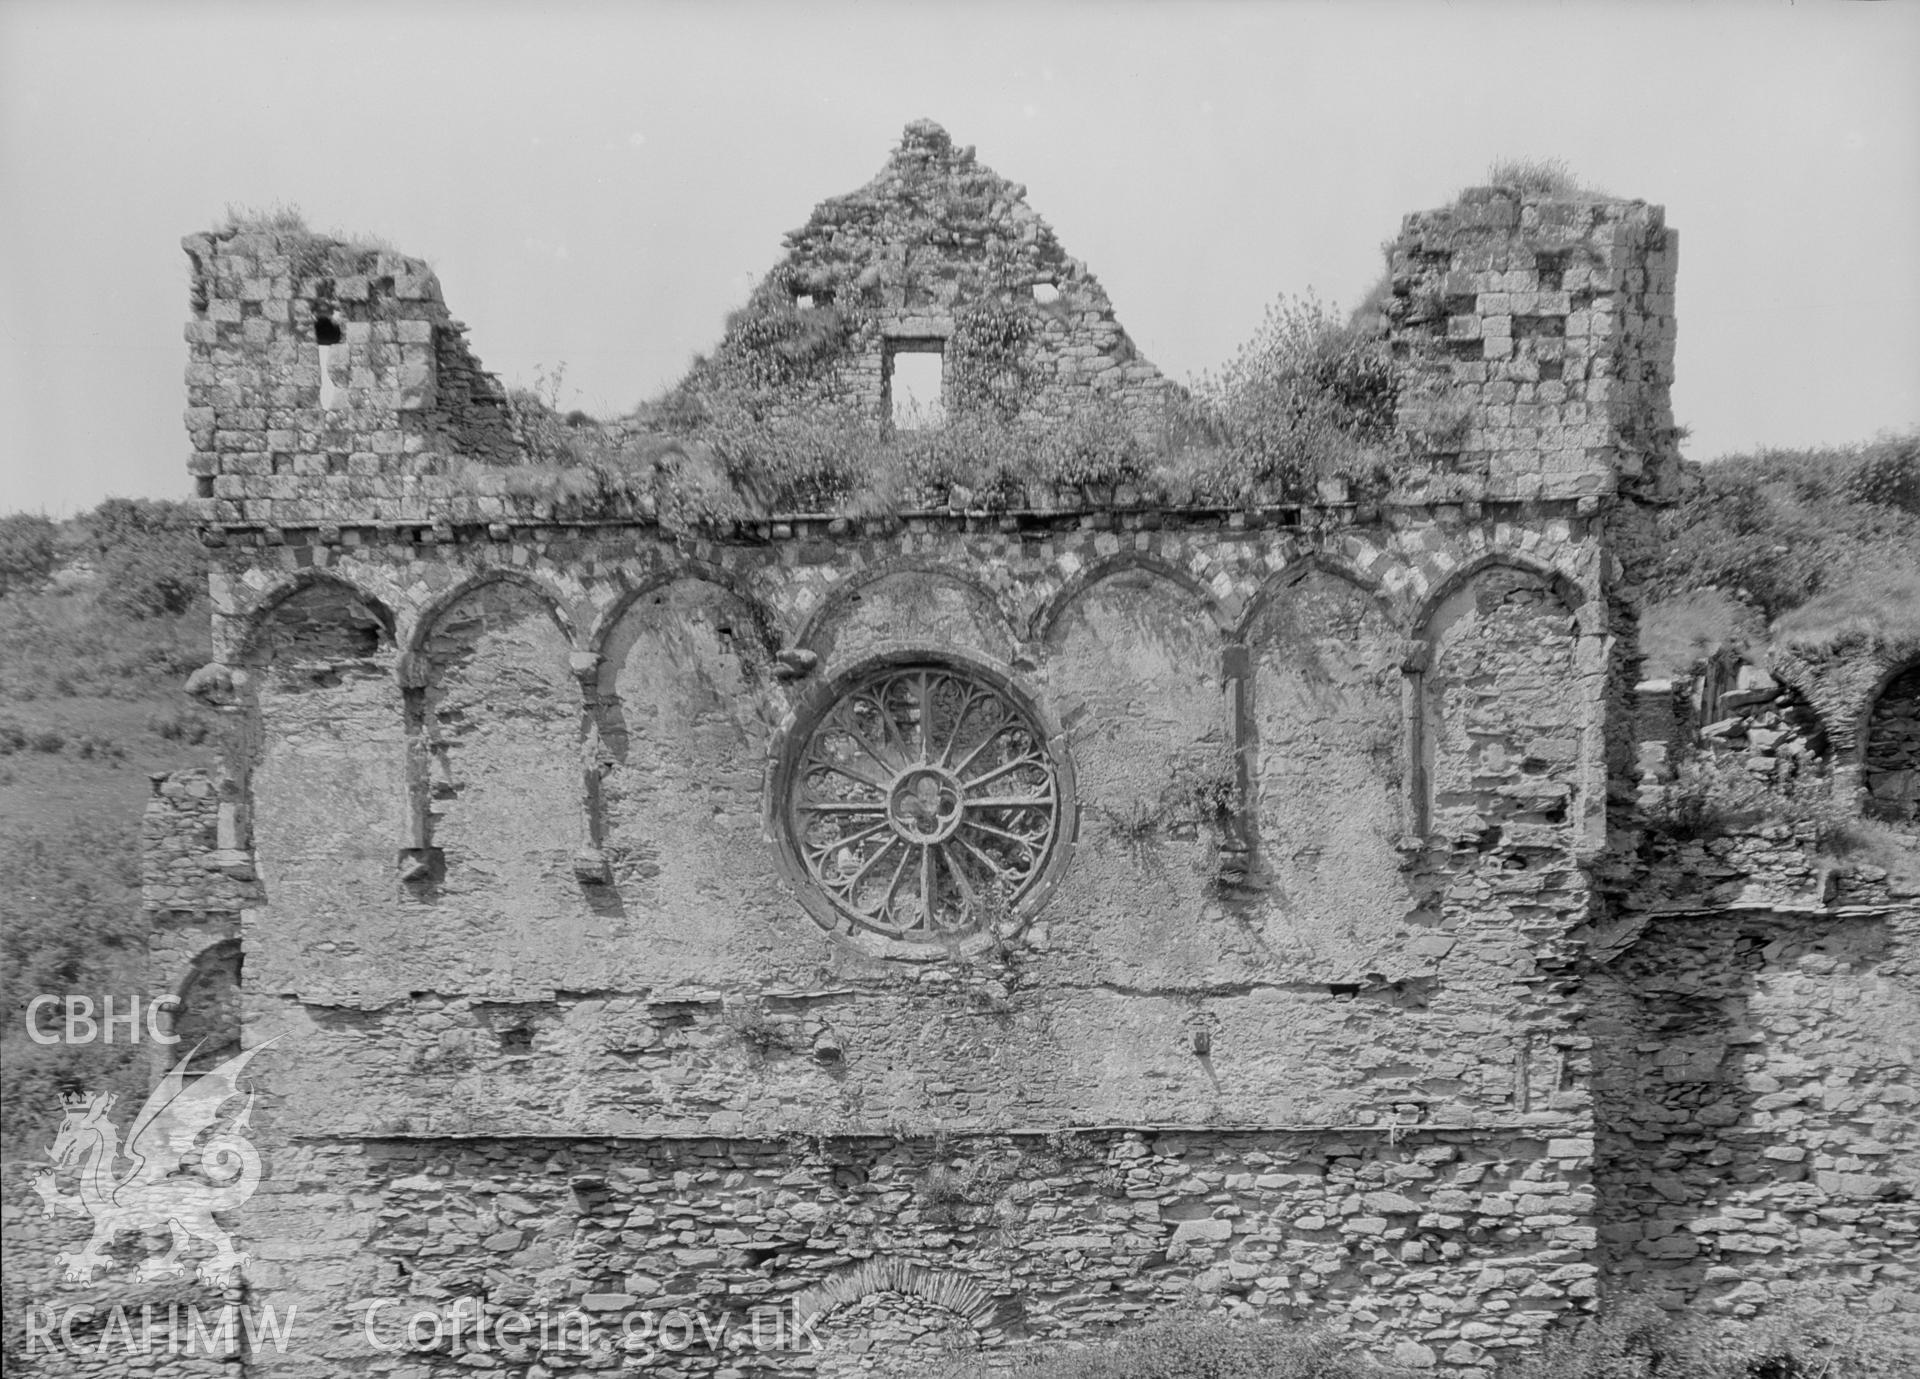 Exterior detail view of the gable end of the Bishops Palace, St Davids, Pembrokeshire, taken by Clayton pre-1950.